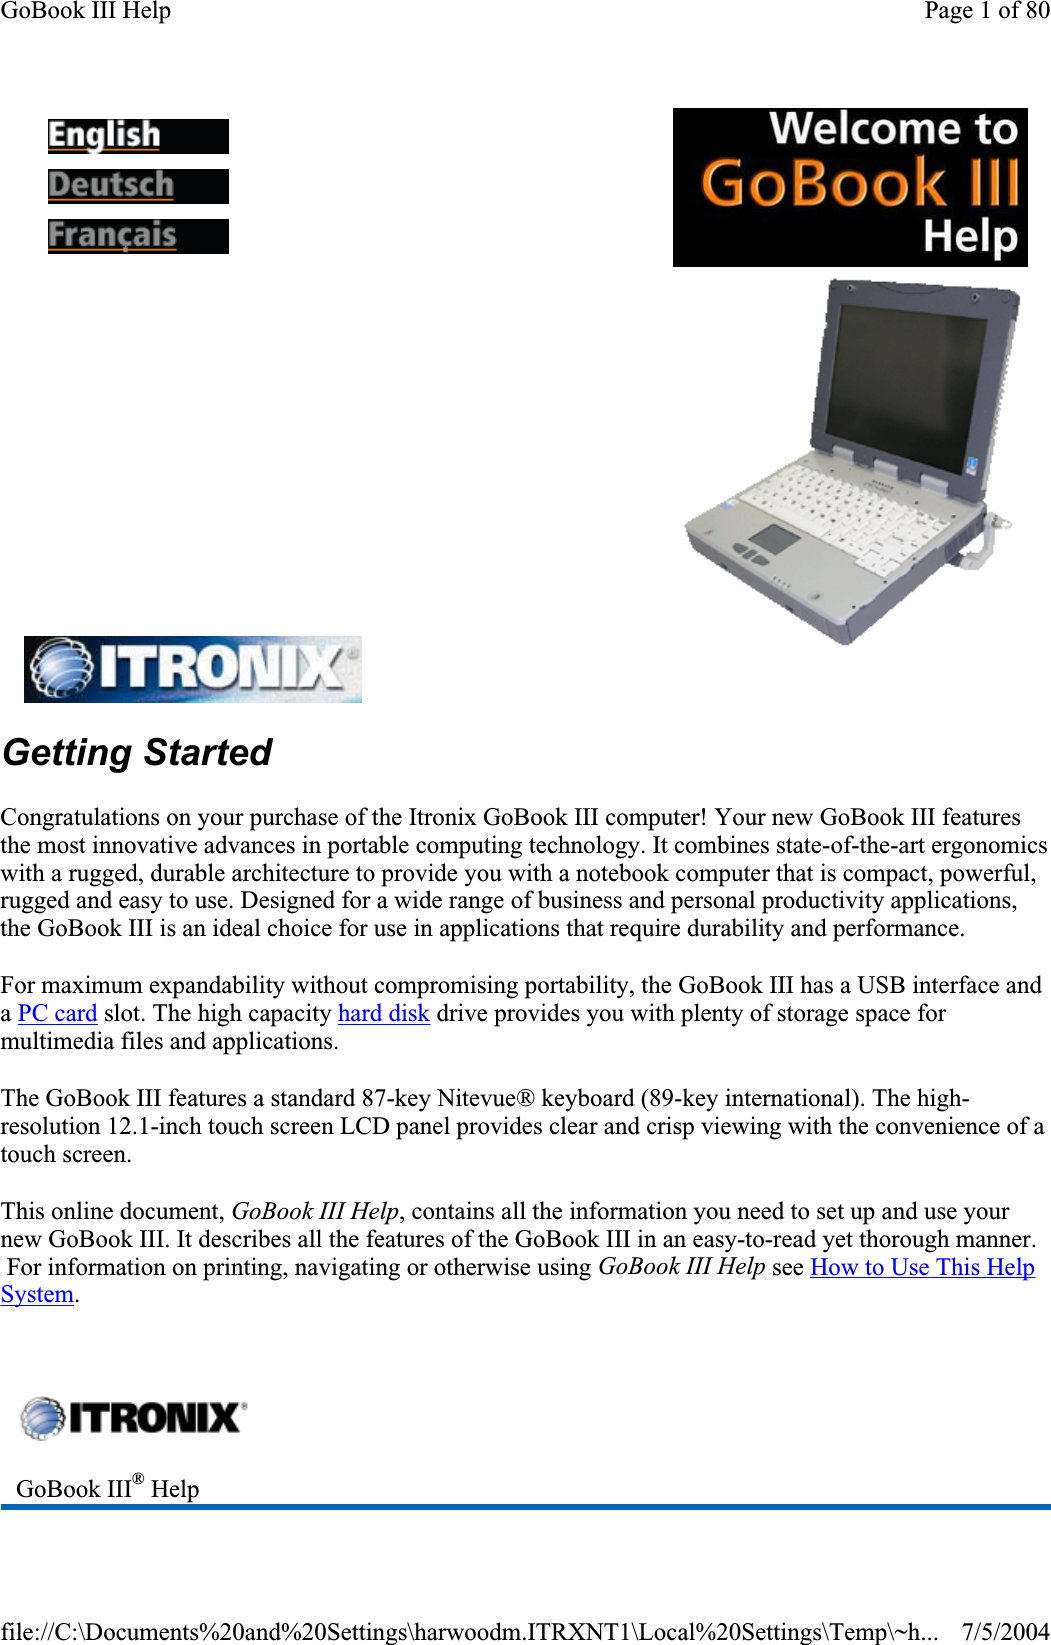 Getting StartedCongratulations on your purchase of the Itronix GoBook III computer! Your new GoBook III features the most innovative advances in portable computing technology. It combines state-of-the-art ergonomics with a rugged, durable architecture to provide you with a notebook computer that is compact, powerful, rugged and easy to use. Designed for a wide range of business and personal productivity applications, the GoBook III is an ideal choice for use in applications that require durability and performance. For maximum expandability without compromising portability, the GoBook III has a USB interface and aPC card slot. The high capacity hard disk drive provides you with plenty of storage space for multimedia files and applications. The GoBook III features a standard 87-key Nitevue® keyboard (89-key international). The high-resolution 12.1-inch touch screen LCD panel provides clear and crisp viewing with the convenience of a touch screen. This online document, GoBook III Help, contains all the information you need to set up and use your new GoBook III. It describes all the features of the GoBook III in an easy-to-read yet thorough manner.  For information on printing, navigating or otherwise using GoBook III Help see How to Use This Help System.GoBook III® HelpPage 1 of 80GoBook III Help7/5/2004file://C:\Documents%20and%20Settings\harwoodm.ITRXNT1\Local%20Settings\Temp\~h...